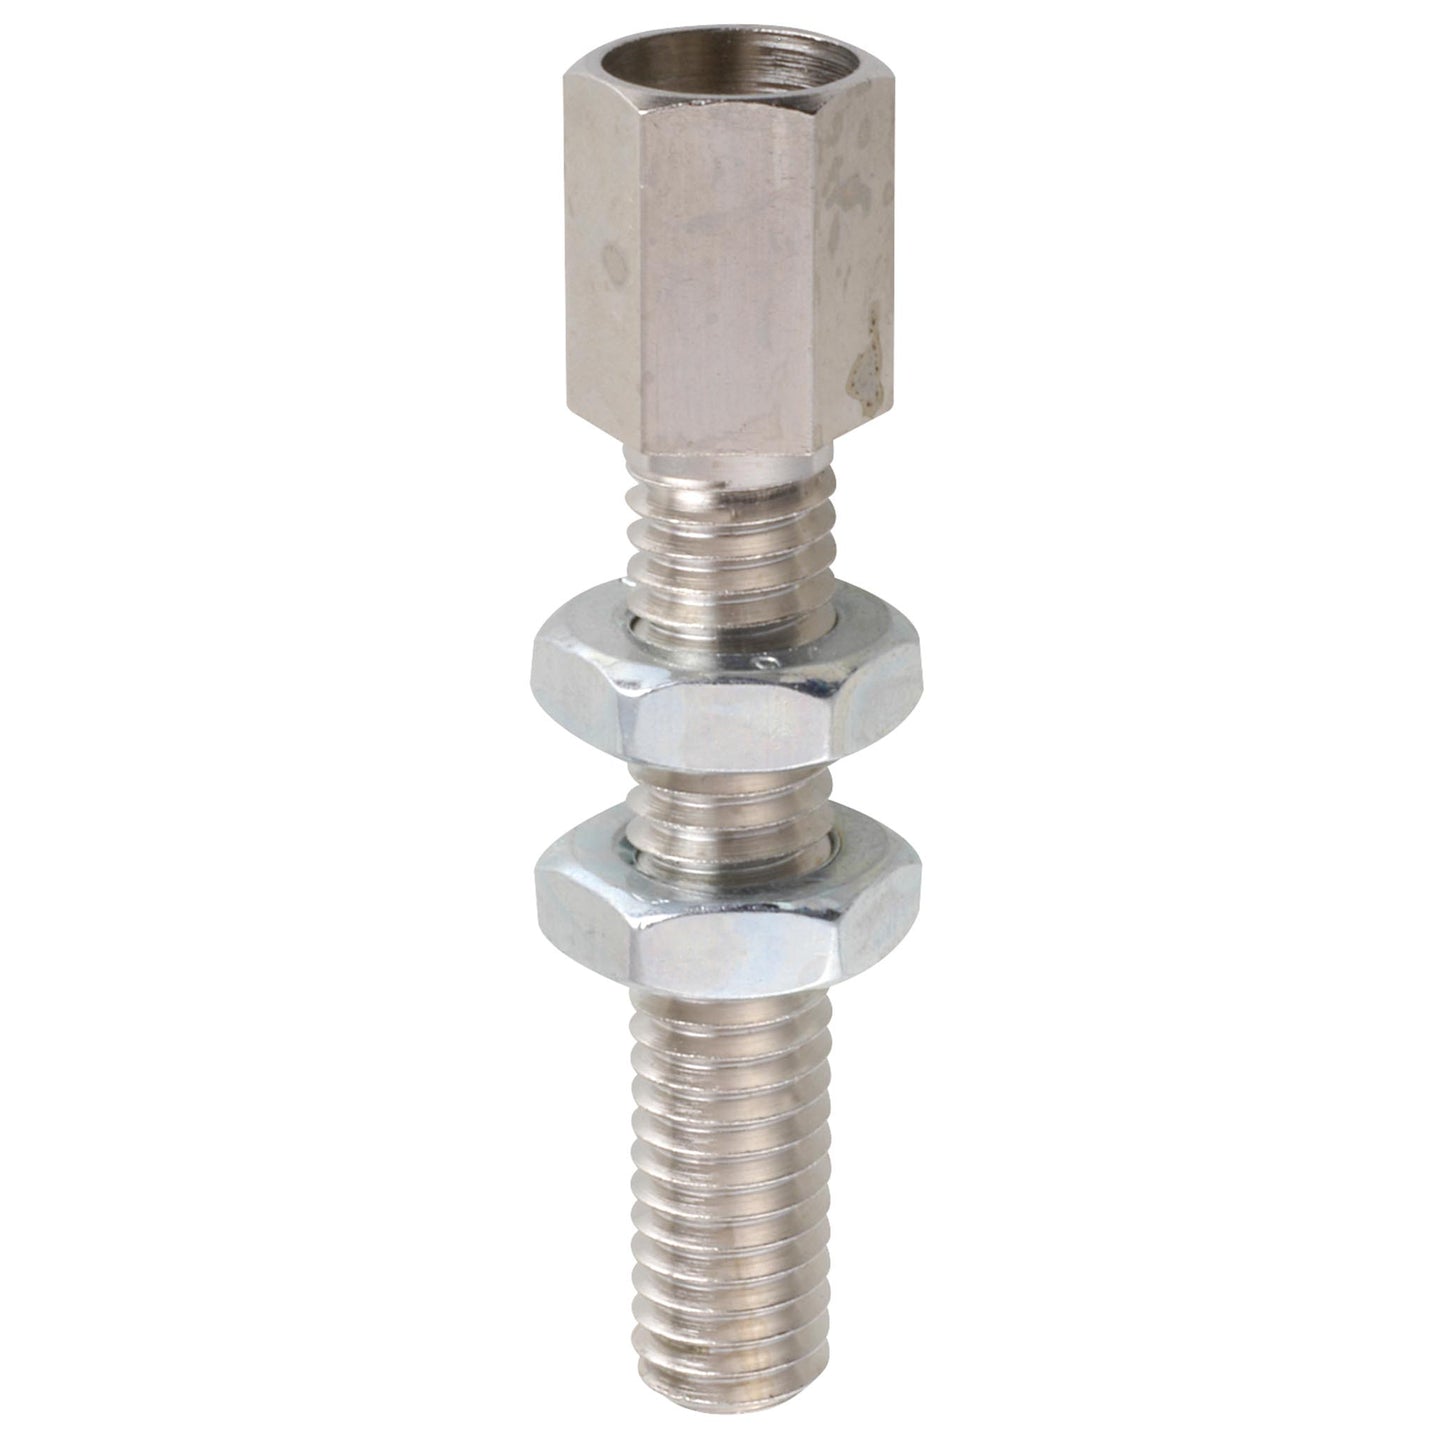 Adjusting screws, mounted with 2 x nuts M 6 x 34 nickel-plated brass